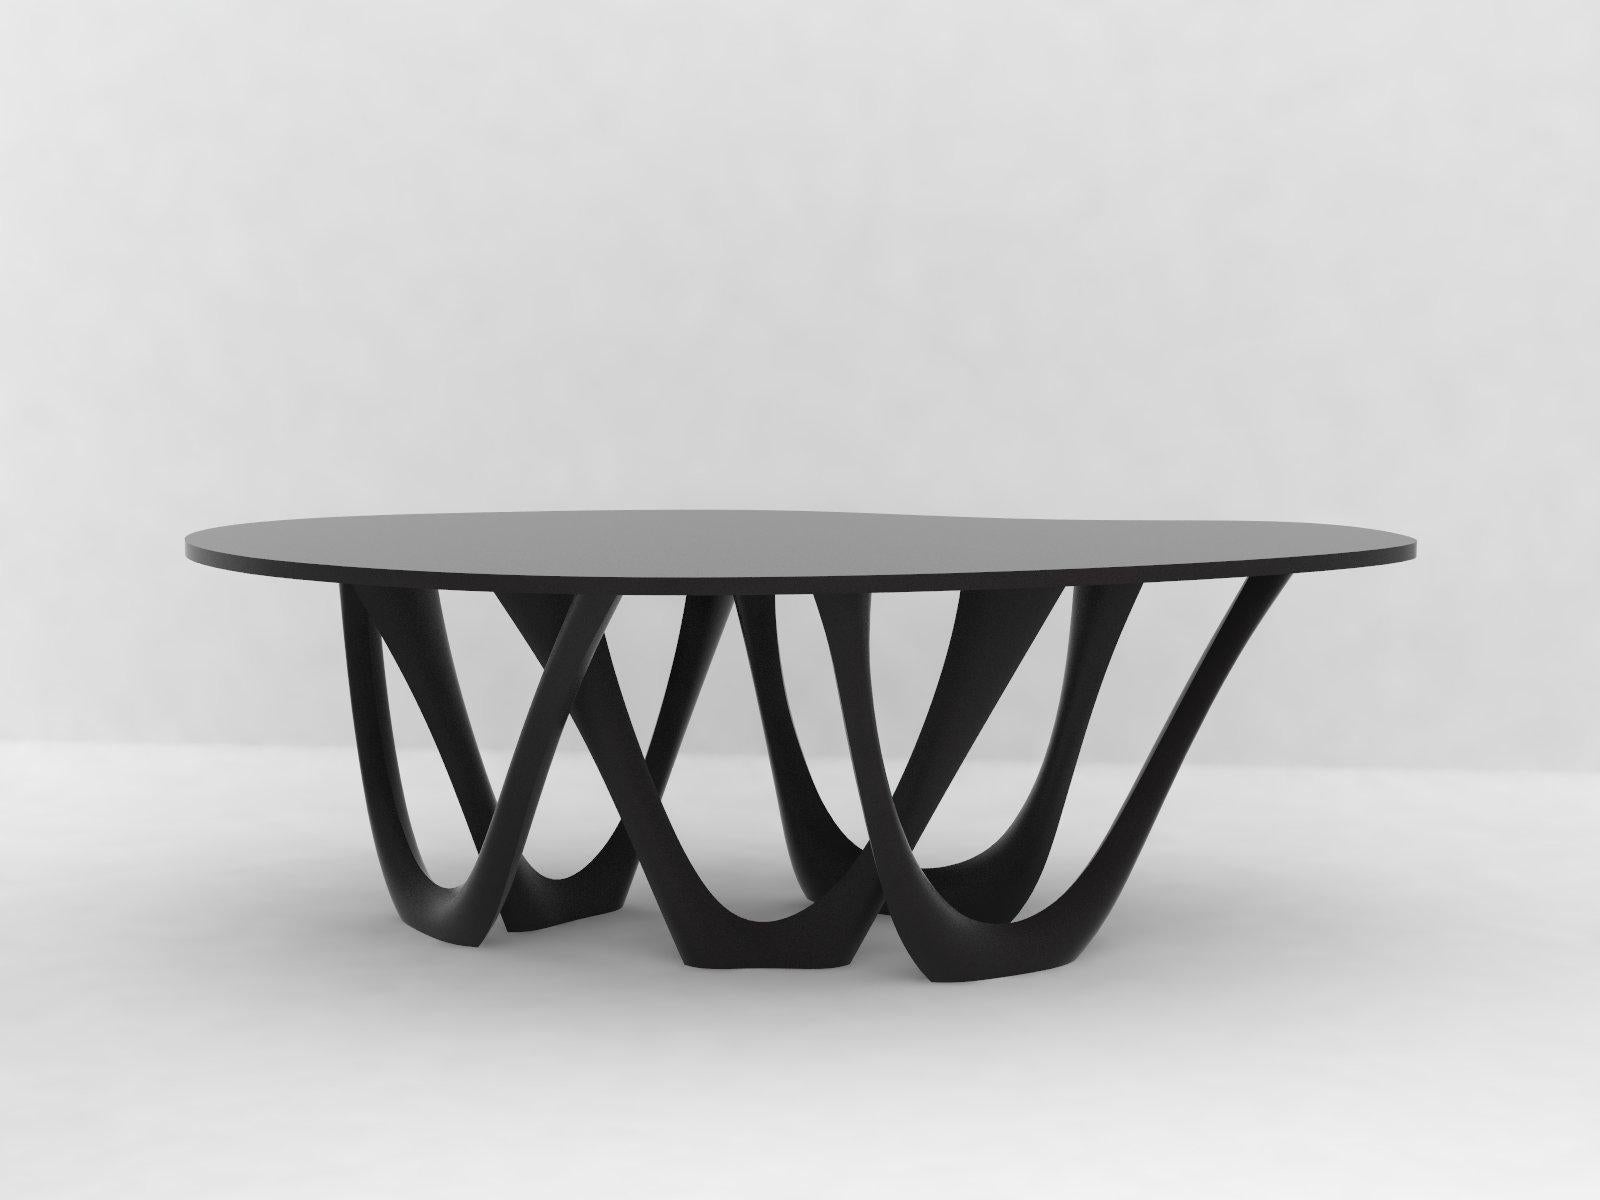 G-Table B+C in Powder-Coated Aluminum with Concrete Top by Zieta For Sale 2